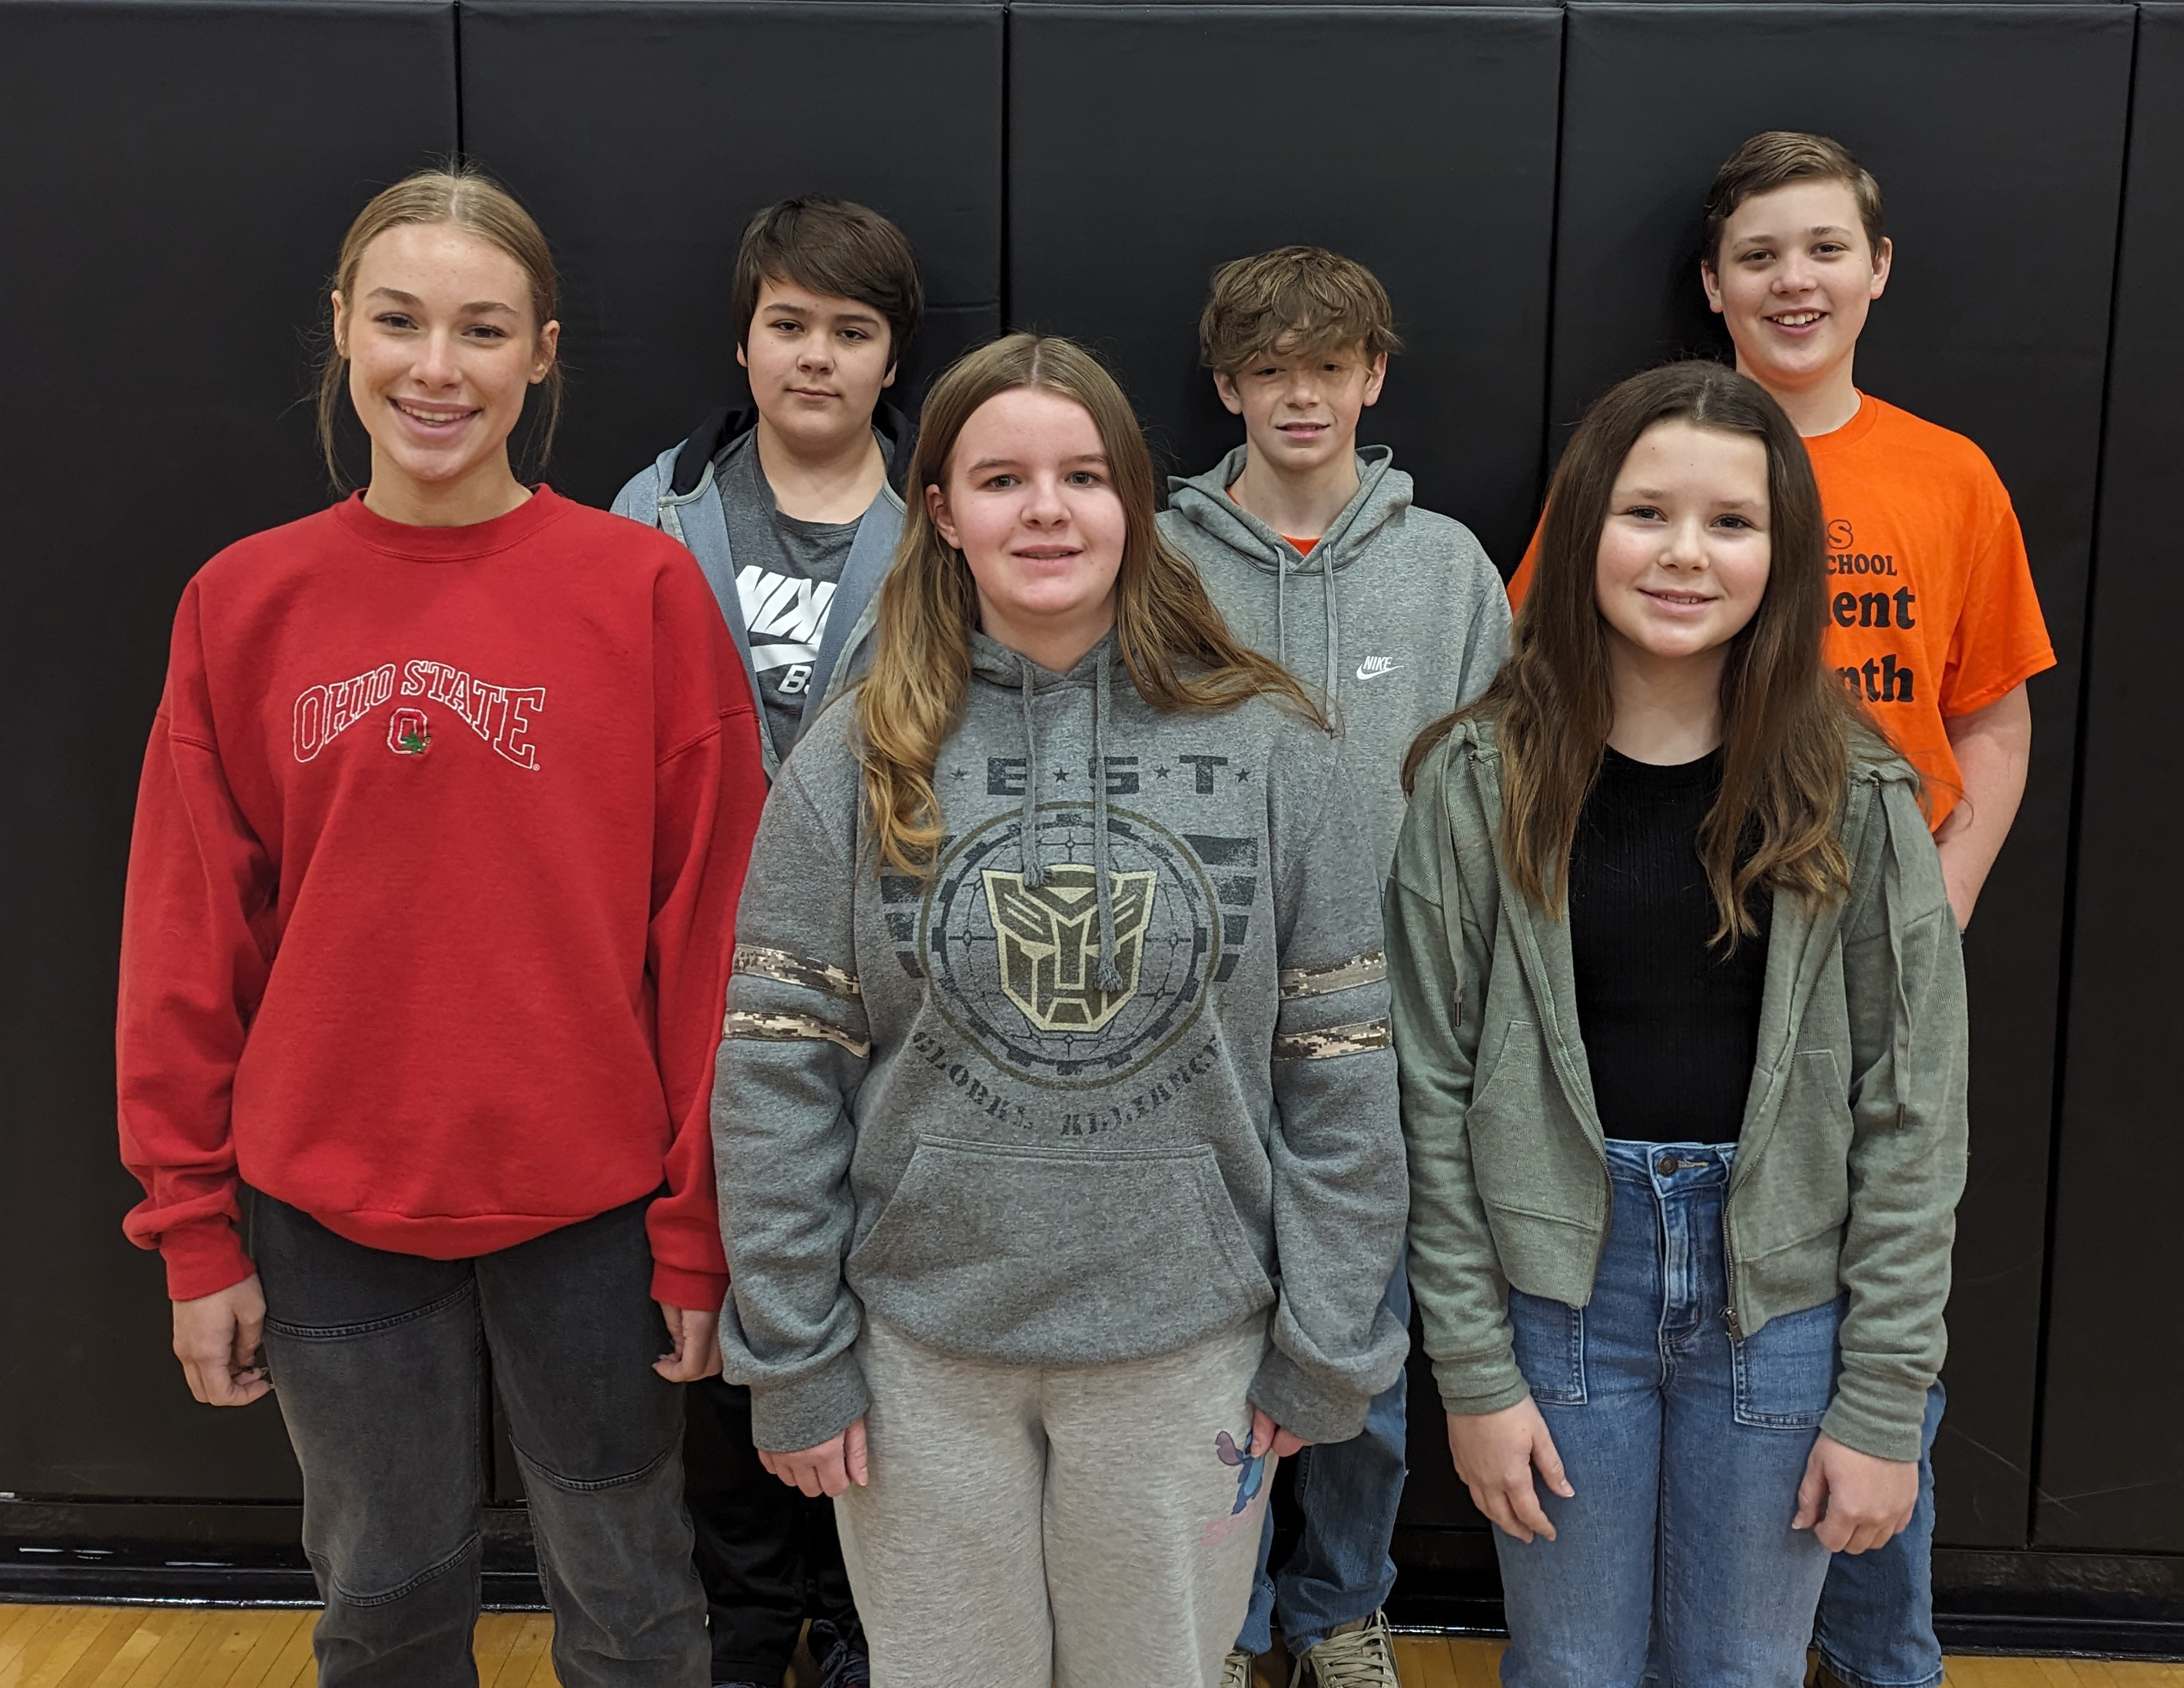 WL-S MS November Students of the Month